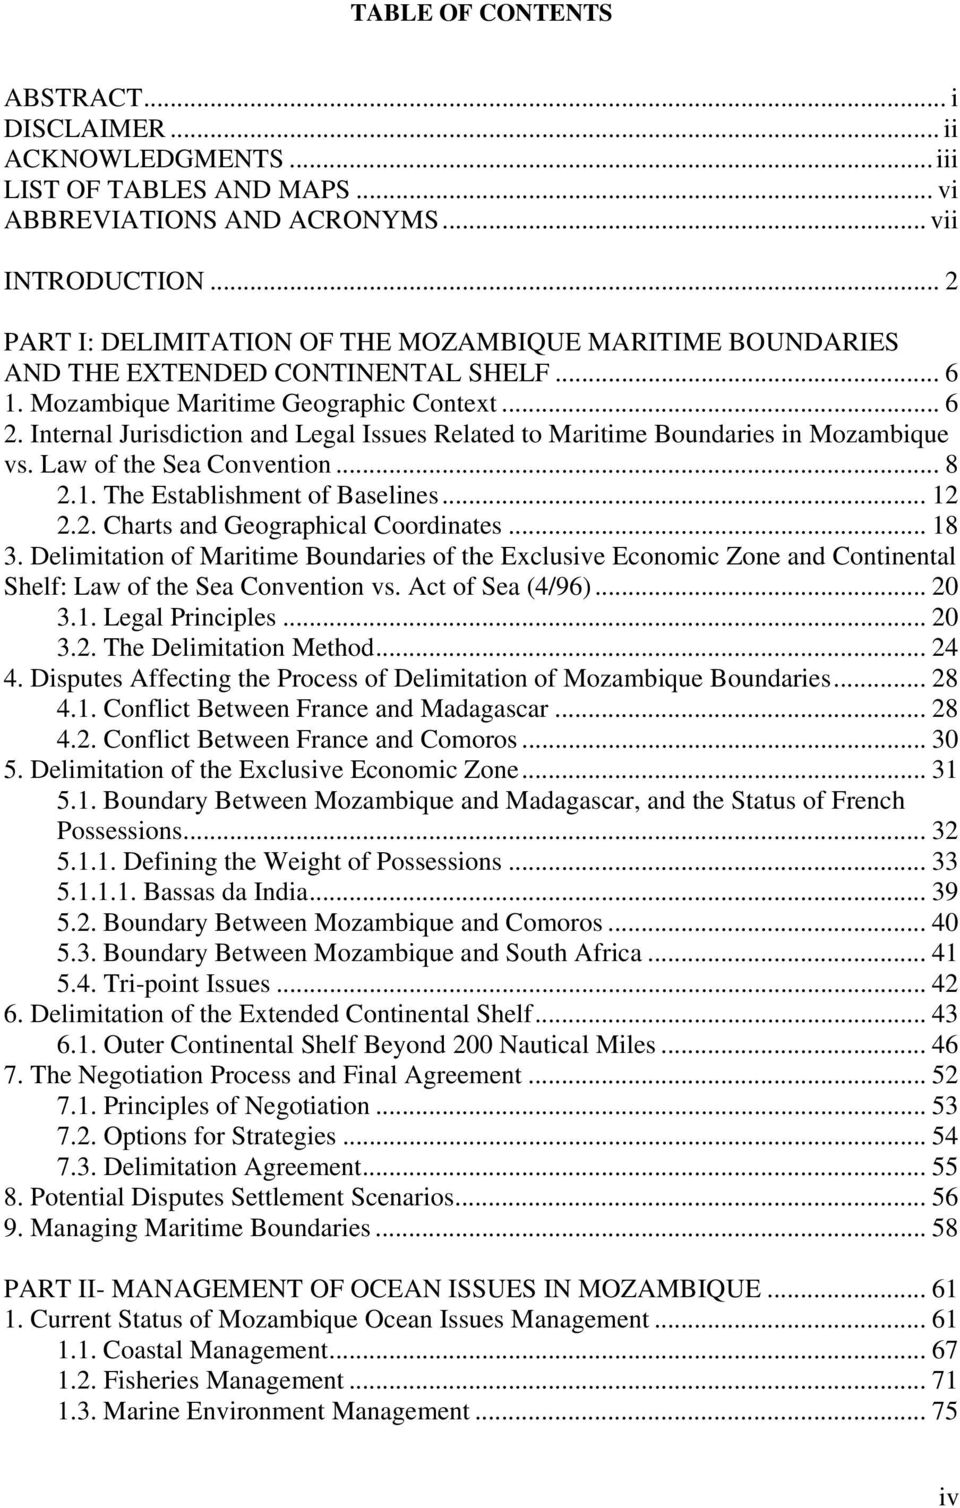 Internal Jurisdiction and Legal Issues Related to Maritime Boundaries in Mozambique vs. Law of the Sea Convention... 8 2.1. The Establishment of Baselines... 12 2.2. Charts and Geographical Coordinates.